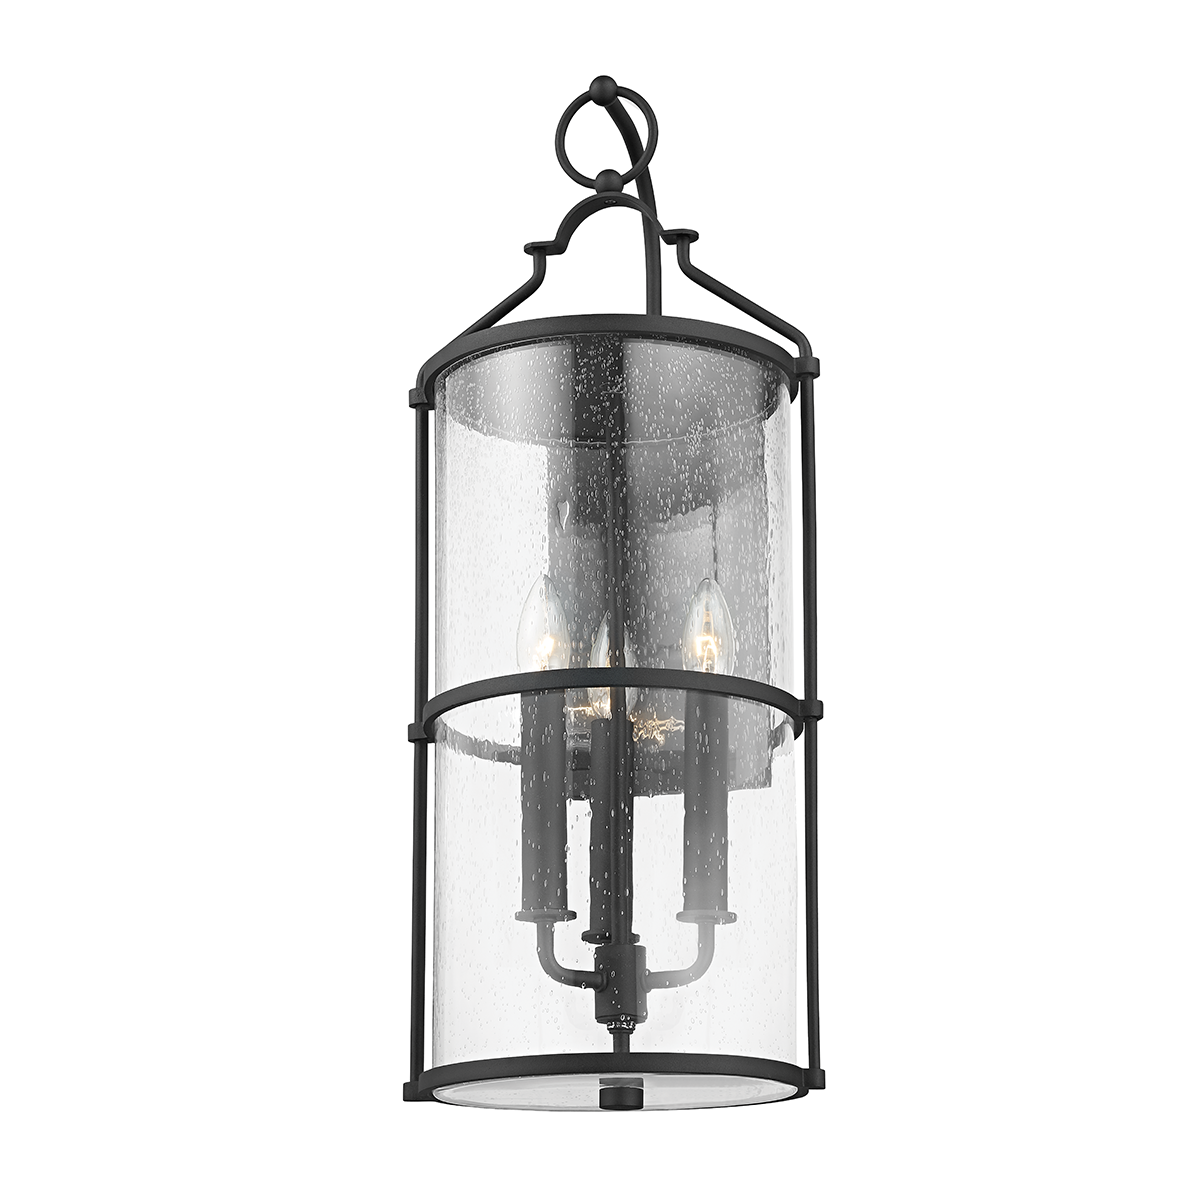 Troy BURBANK 3 LIGHT LARGE EXTERIOR WALL SCONCE B1313 Outdoor l Wall Troy Lighting   